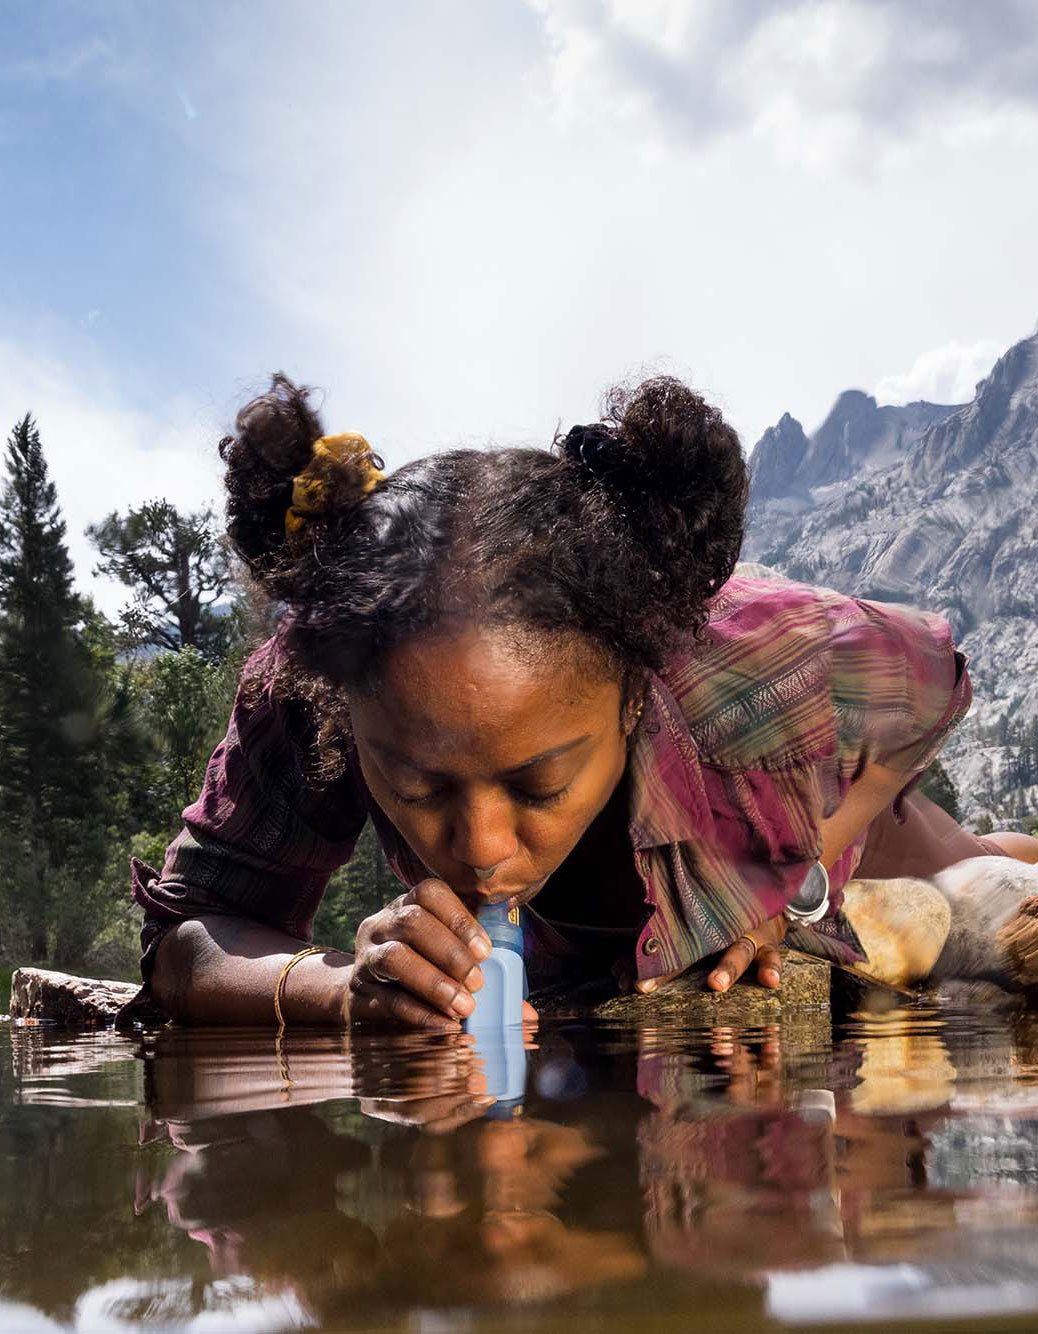 LifeStraw's Peak Series Water Filter Straw is a camping essential